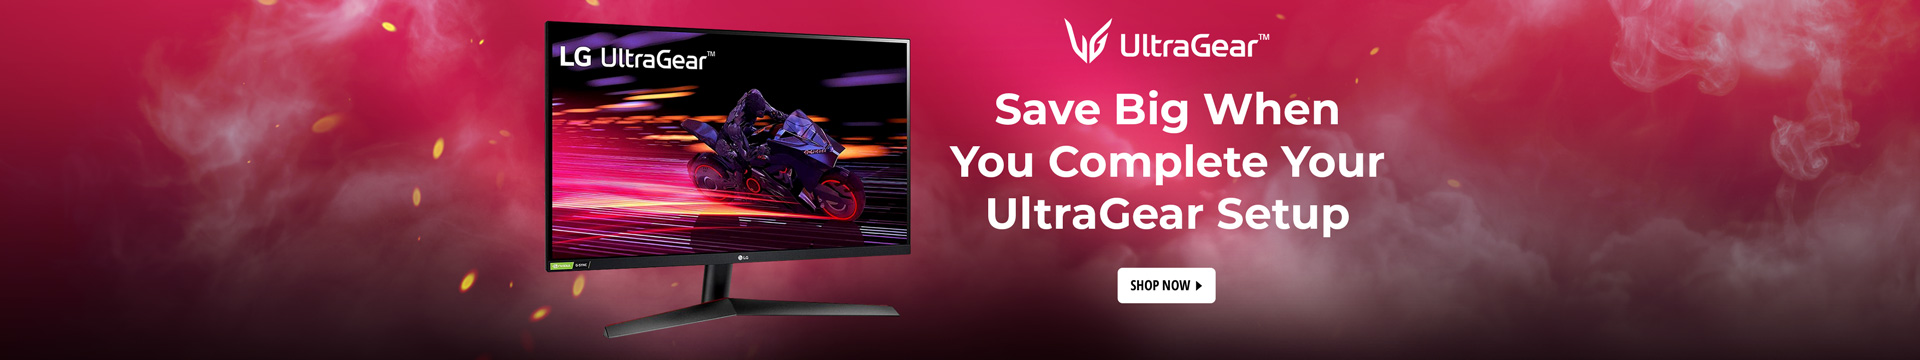 Save big when you complete your ultraGear setup